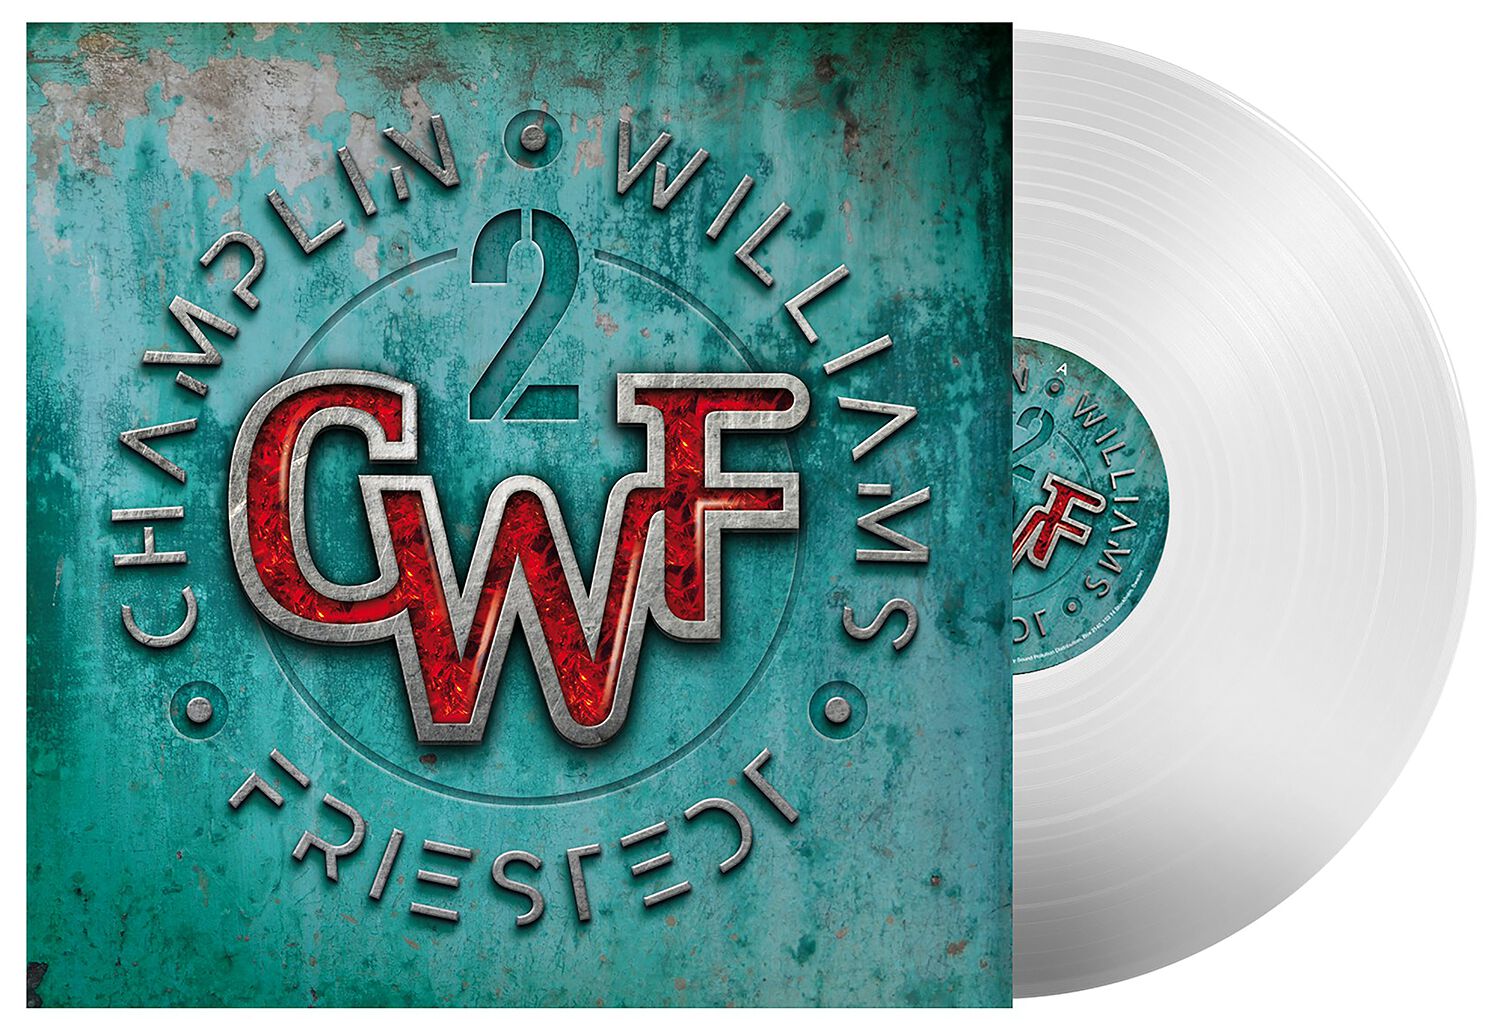 Cwf Ii Champlin Williams Friestedt Lp Emp 1.8k likes · 3 talking about this. emp